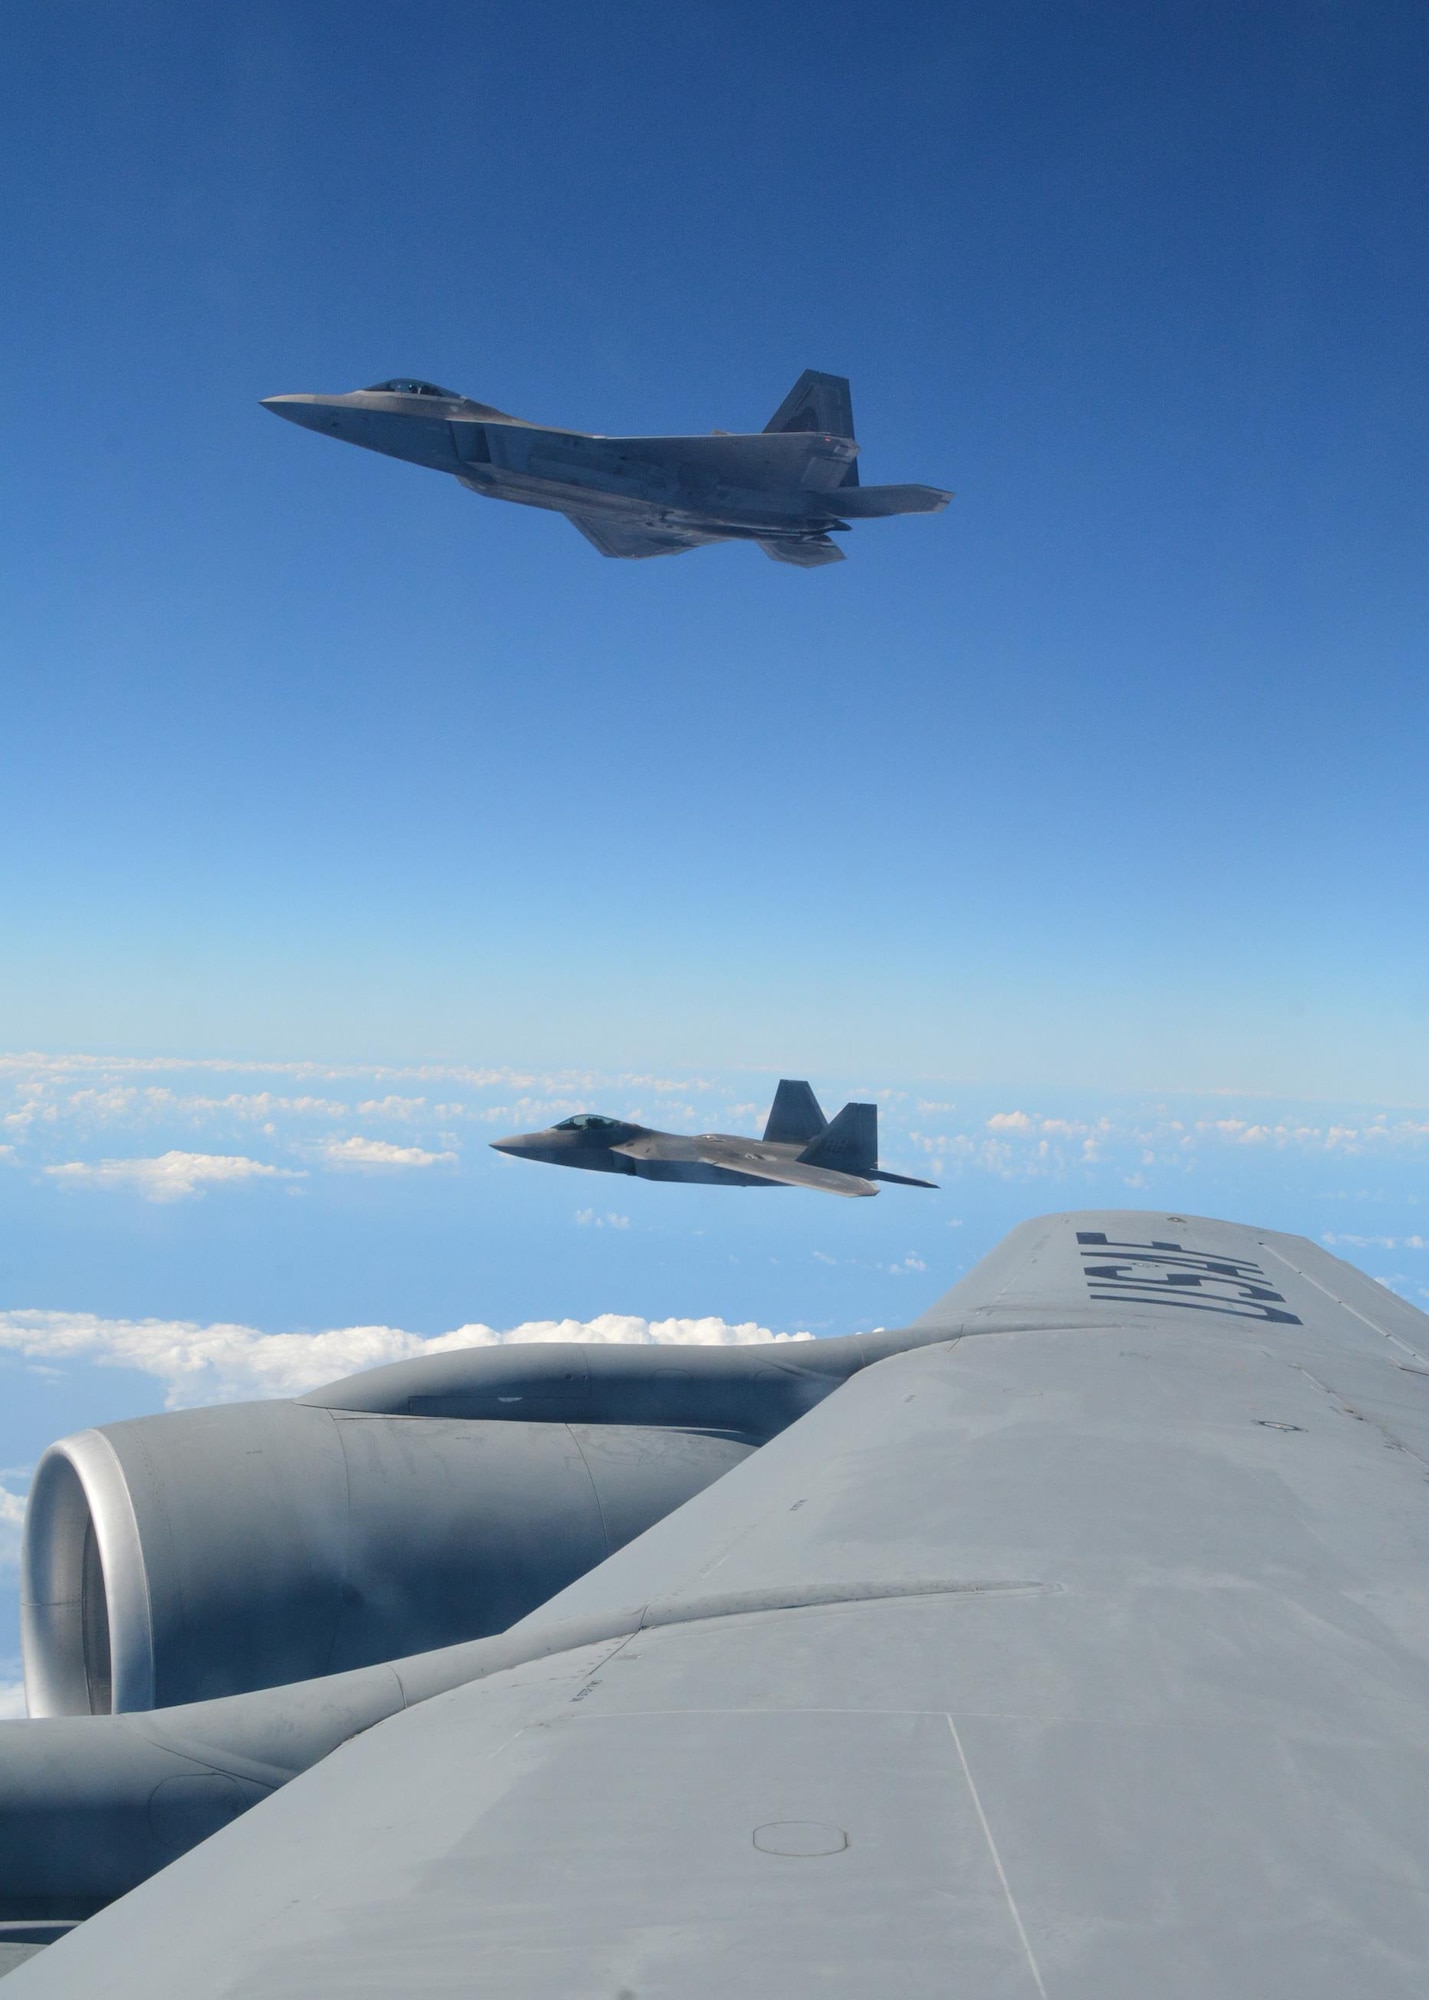 Two Hawaiian F-22 Raptors fly alongside the wing of a KC-135R Stratotanker flown by Citizen Airmen of the 465th Air Refueling Squadron, Tinker Air Force Base, Oklahoma.   Since arriving in Hawaii July 7, the 465th ARS along with other Reserve units have offloaded over 2 million pounds of fuel to U.S. and Royal Canadian aircraft during RIMPAC 2016. (U.S. Air Force video by Tech. Sgt. Lauren Gleason)